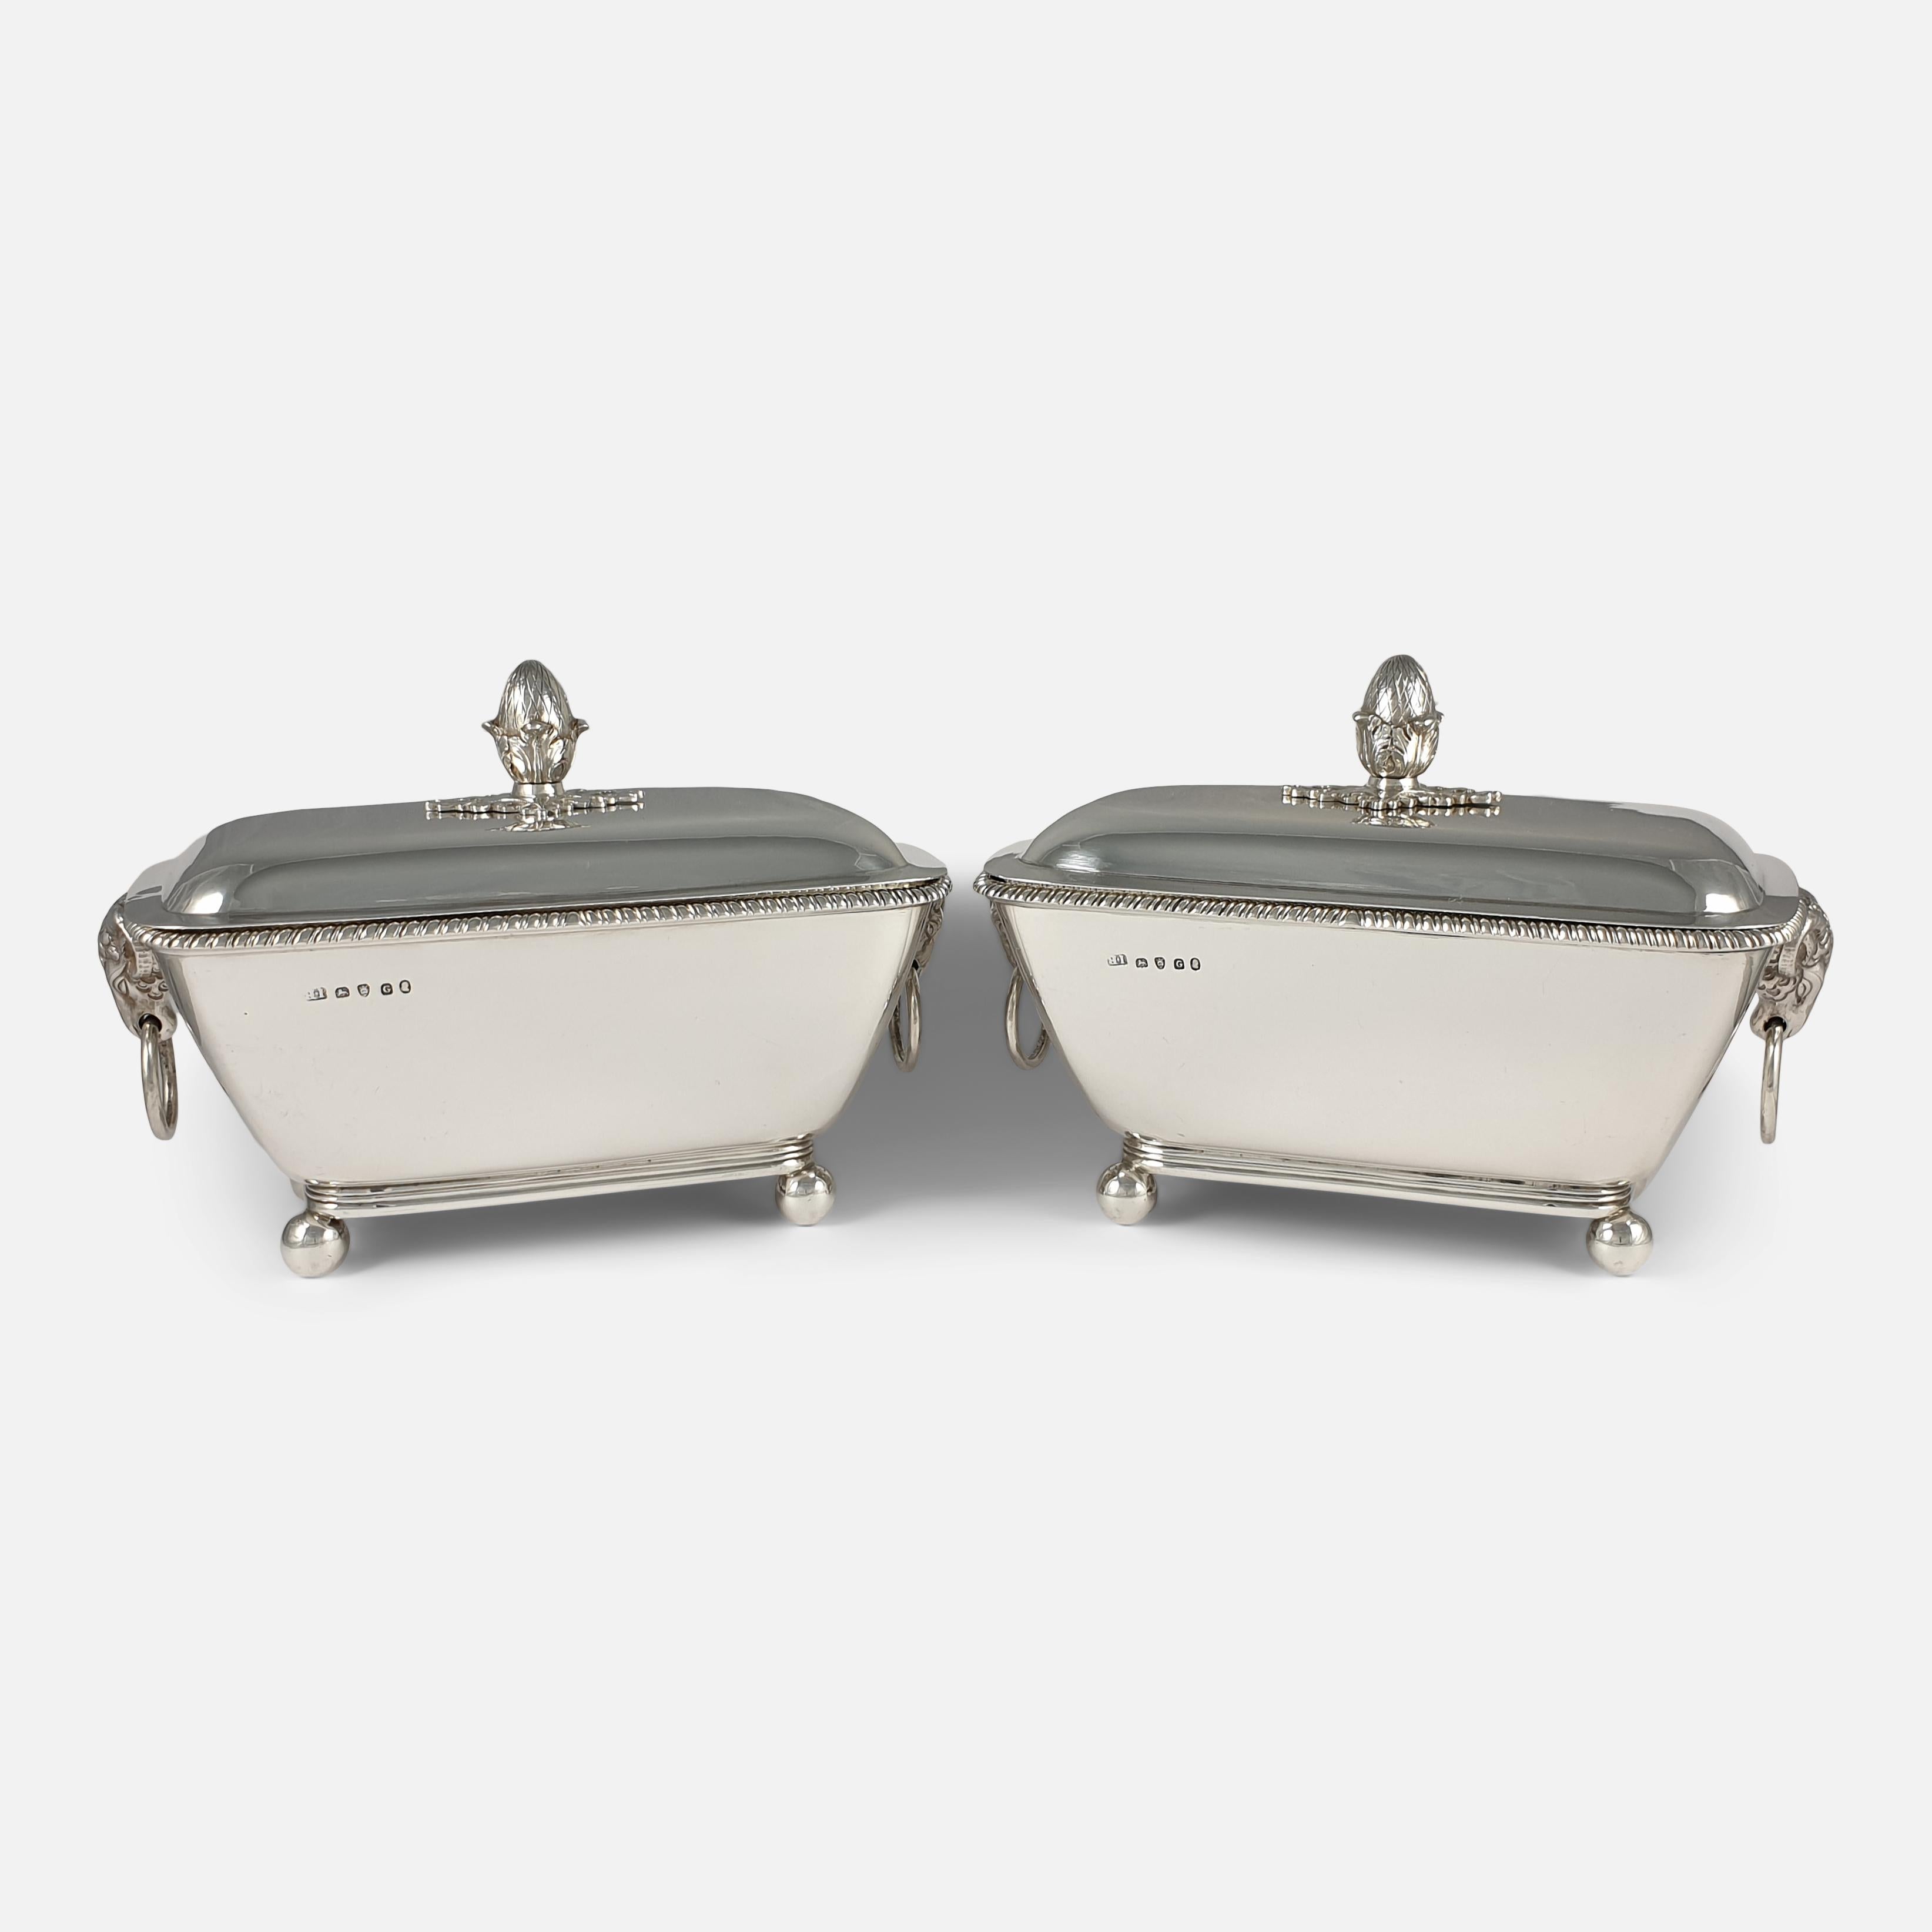 Pair of George III Silver Sauce Tureens and Covers, John Robins, London, 1802 For Sale 5